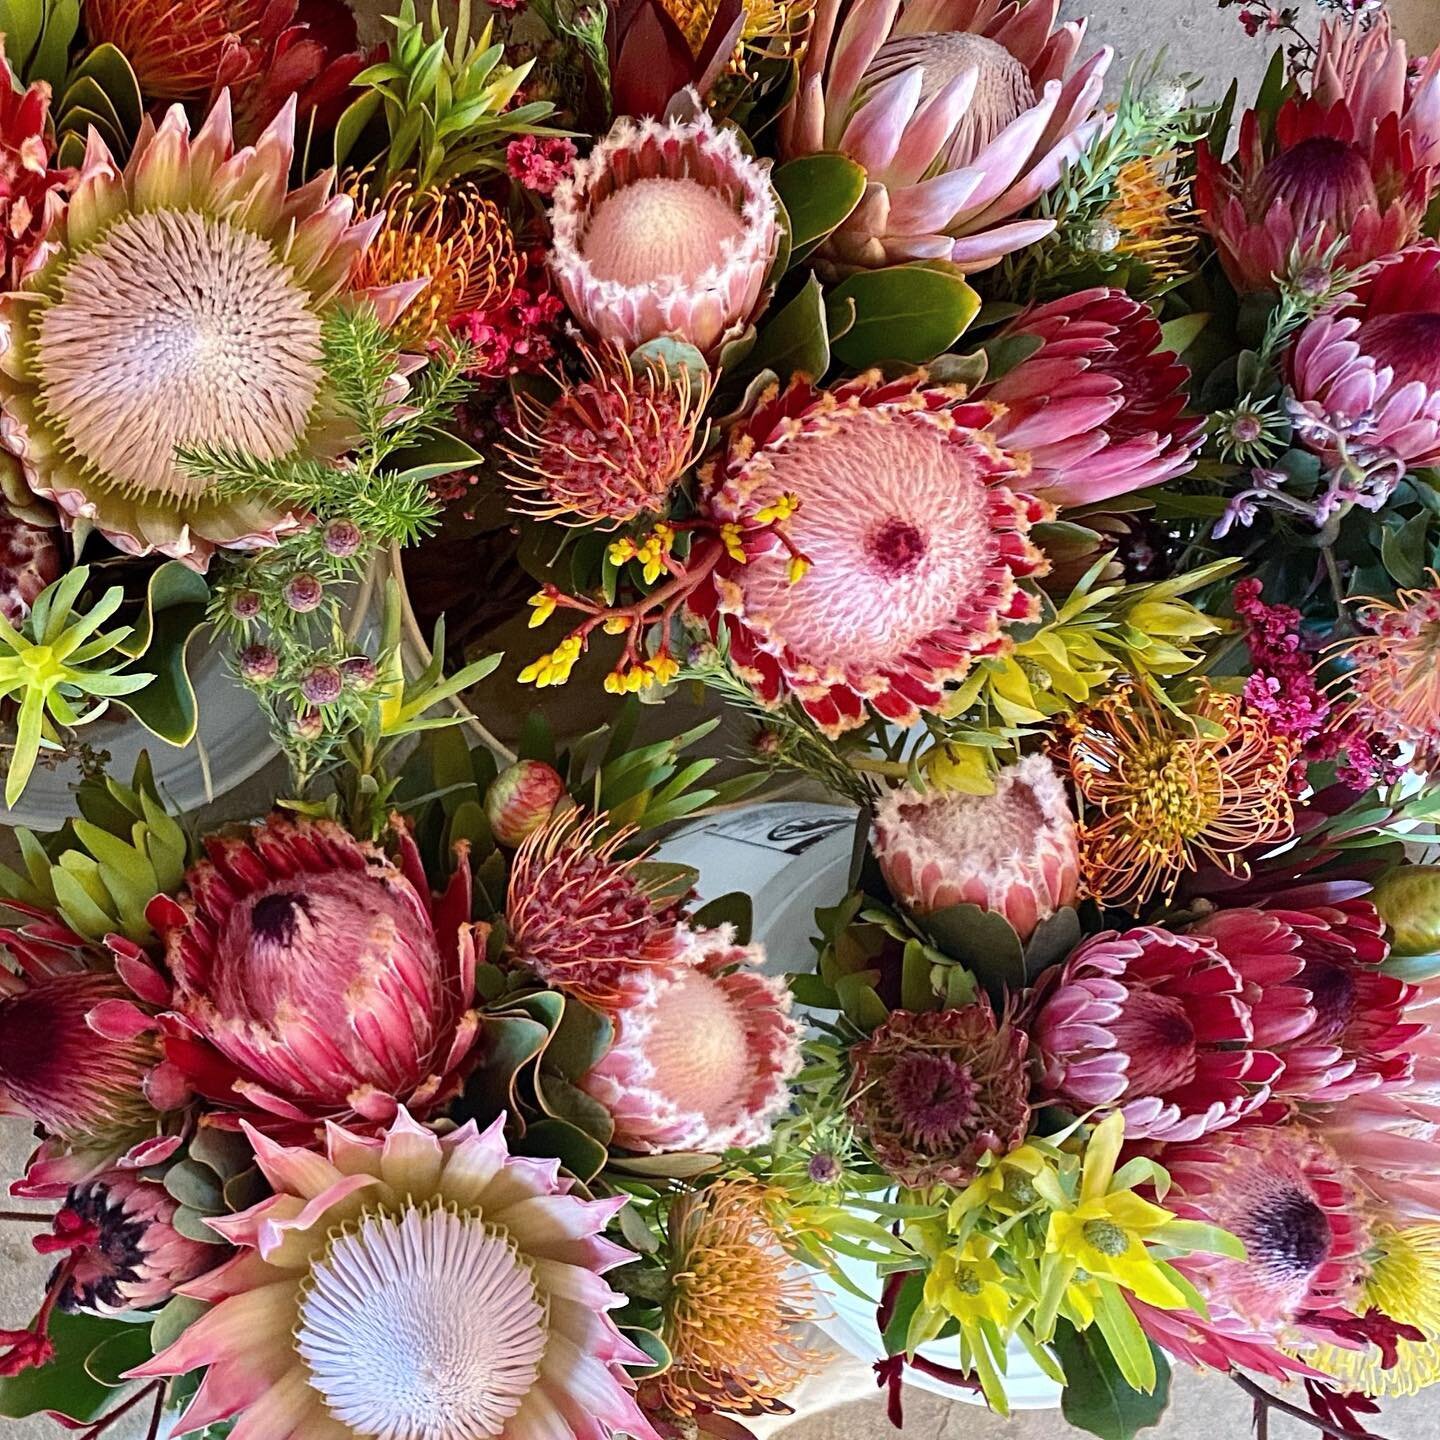 We are getting SO excited for another Mother&rsquo;s Day!! Don&rsquo;t forget to use discount code LOVEMOM for 15% off a bouquet for mom this year 😊

#wreath #proteawreath #easter #bouquet #easterflowers #flowers #protea #pincushion #banksia #sustai